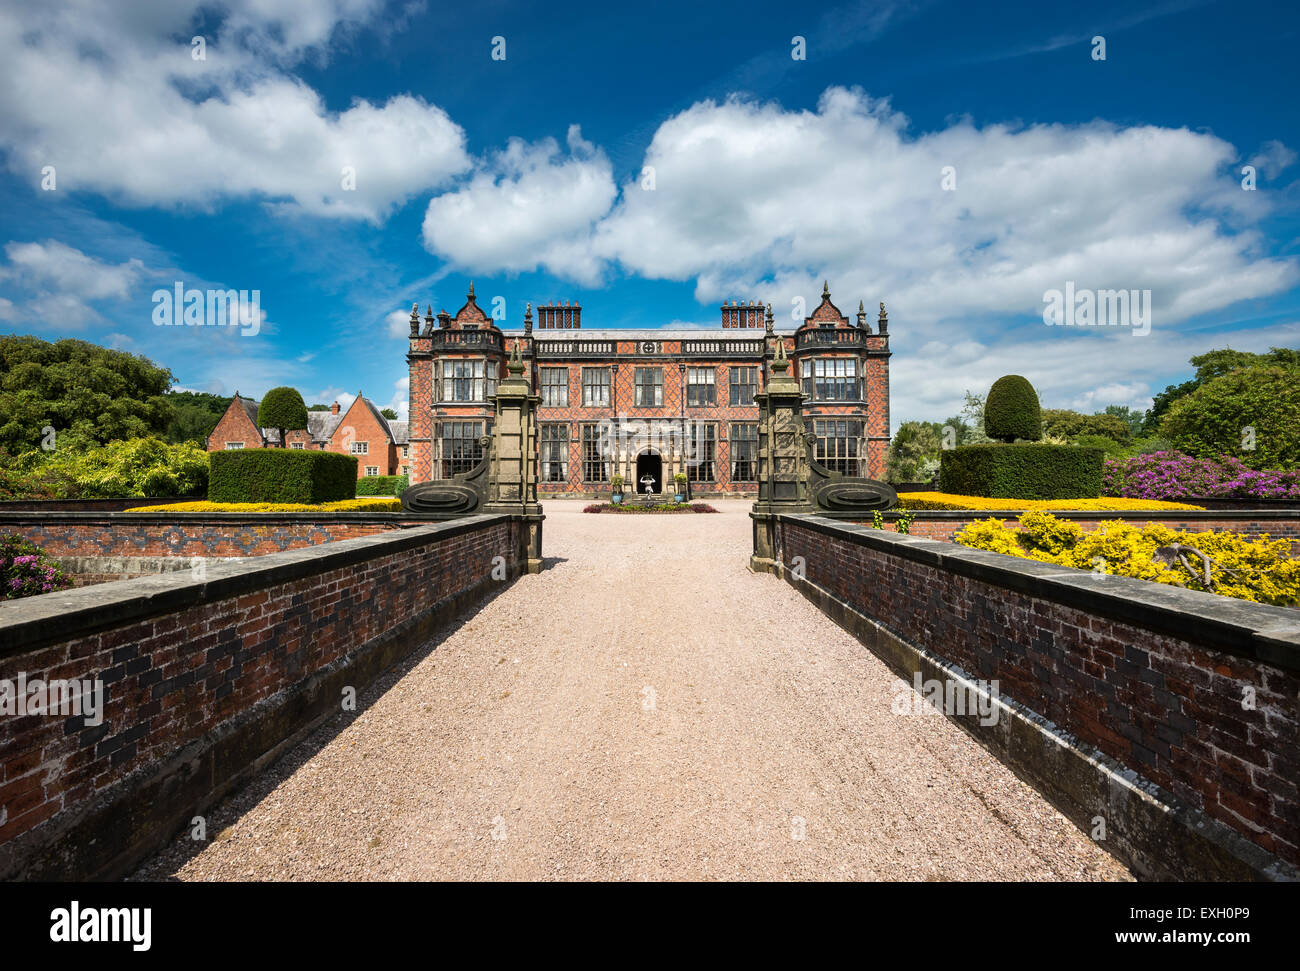 The driveway leading to the front of Arley Hall in Cheshire, England. Stock Photo